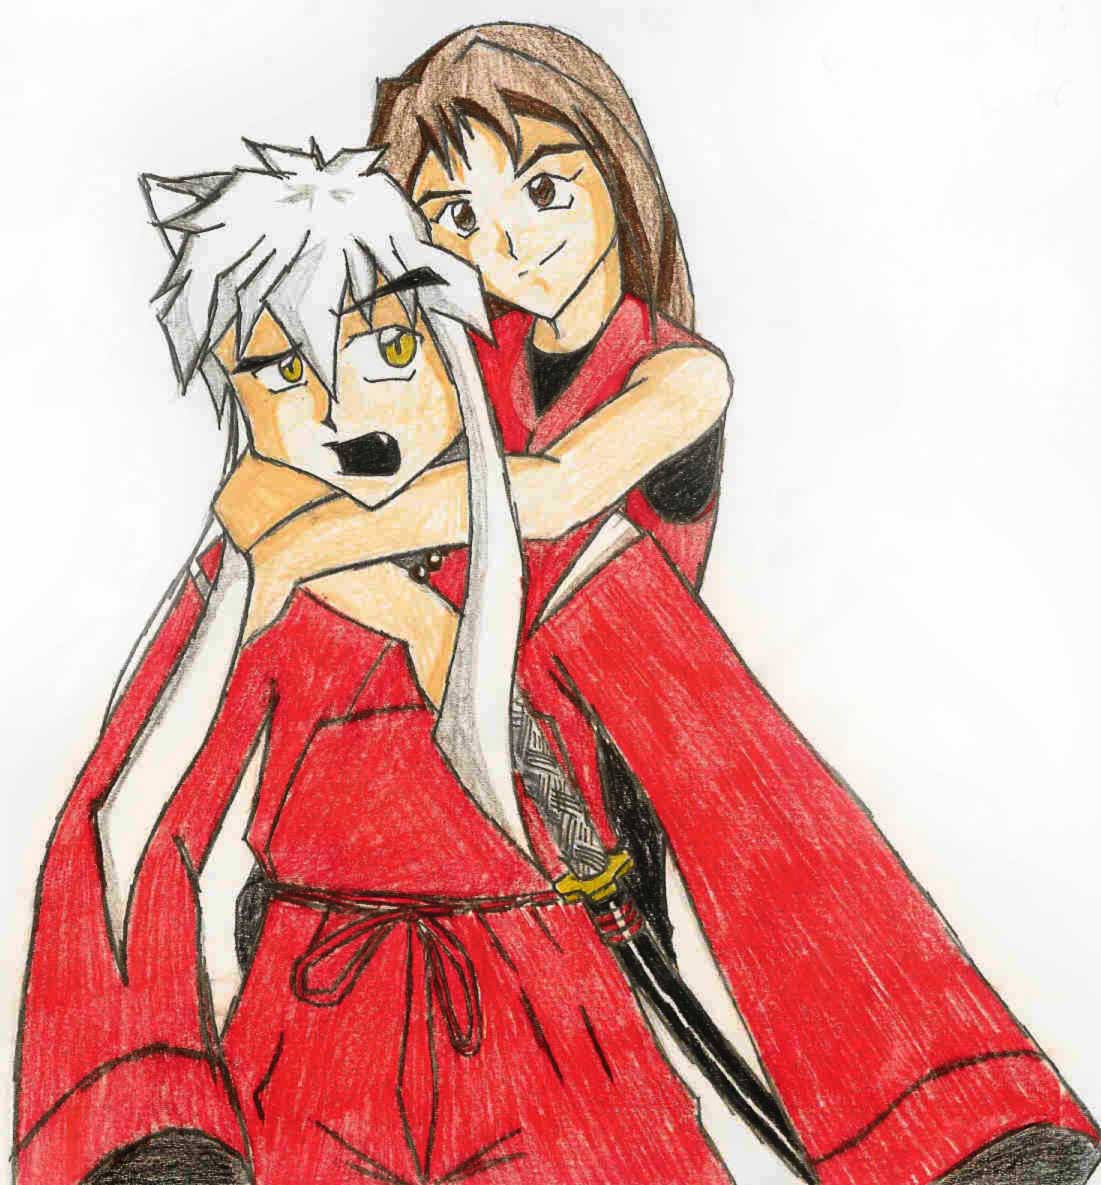 Inuyasha & SSBM_lover *request by: SSBM_lover by Black_Wind